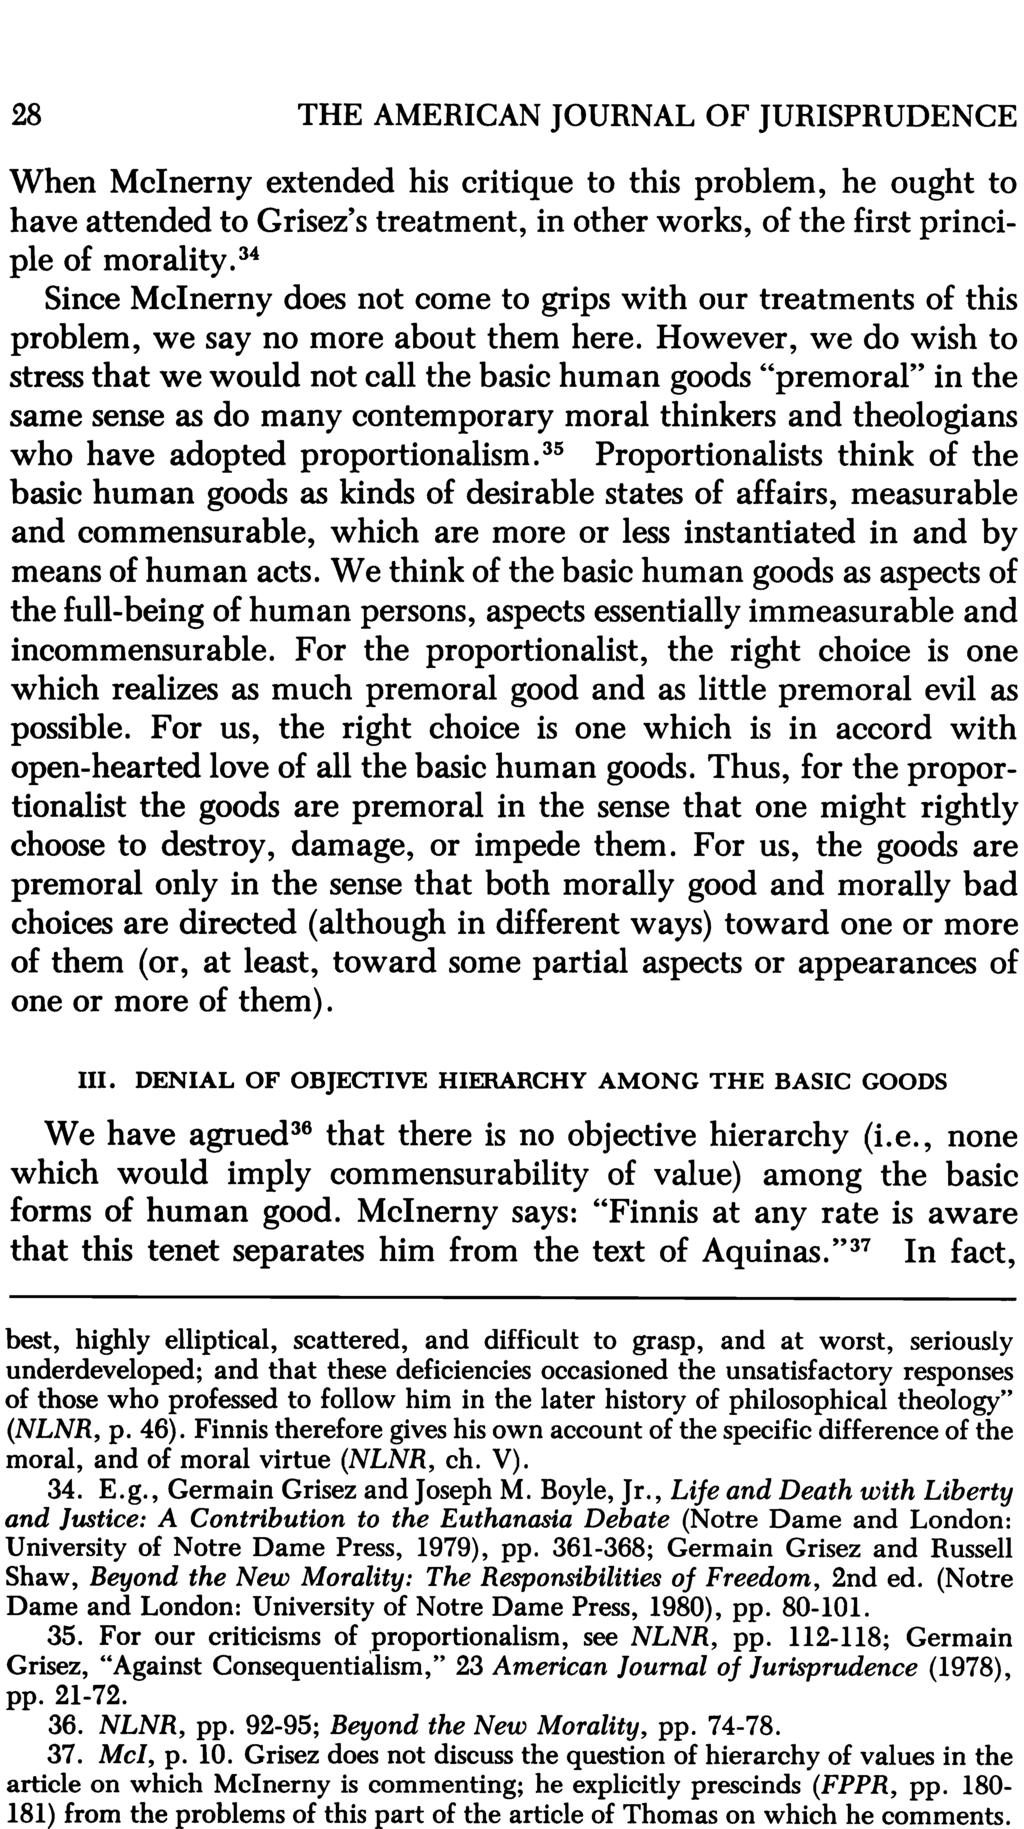 28 THE AMERICAN JOURNAL OF JURISPRUDENCE When Mclnerny extended his critique to this problem, he ought to have attended to Grisez's treatment, in other works, of the first princi ple of morality.